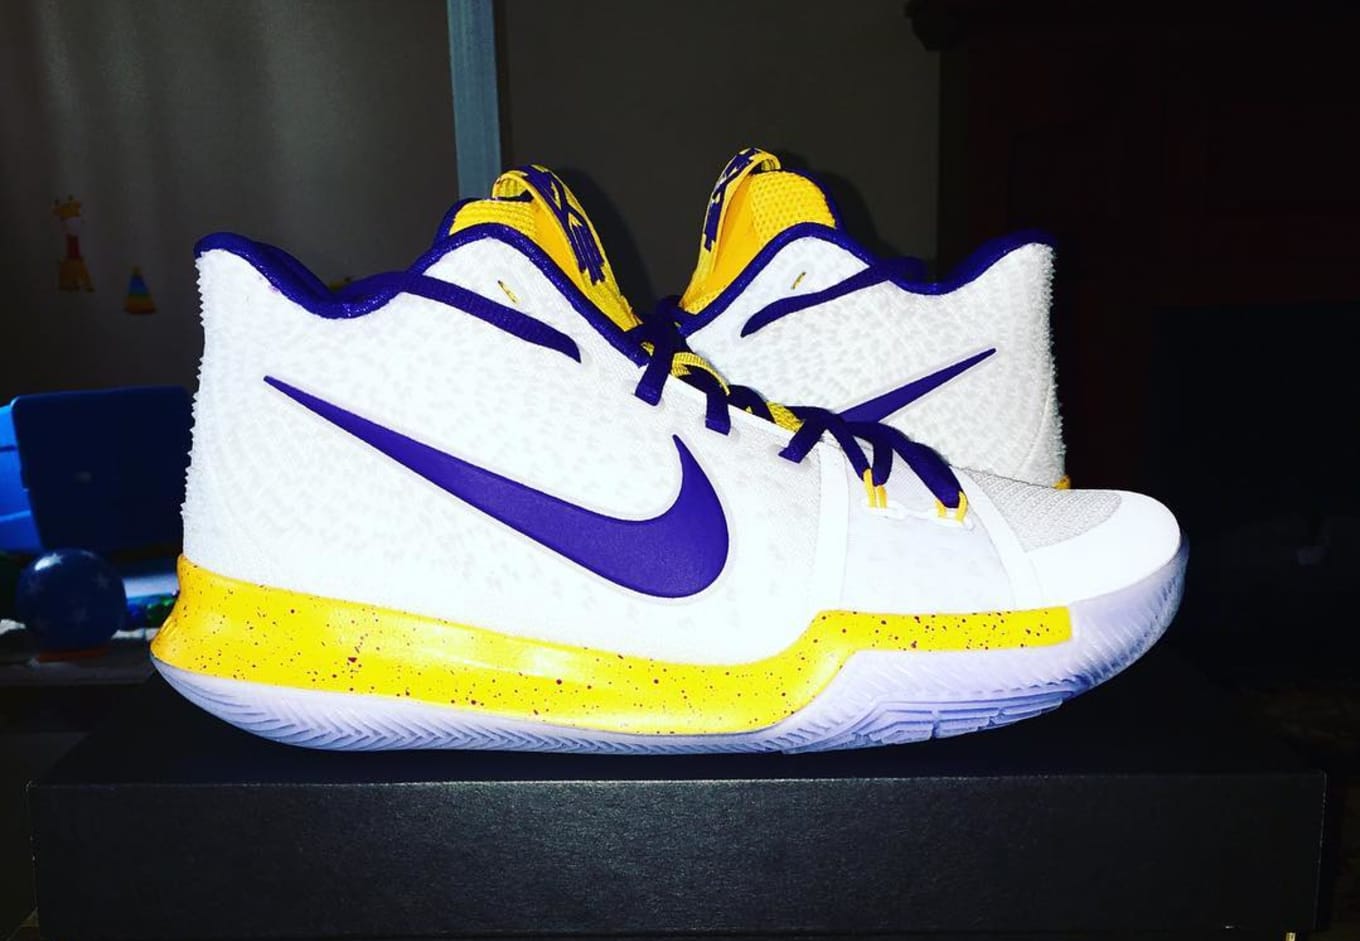 The Best Nike Kyrie 3 Designs Sole Collector